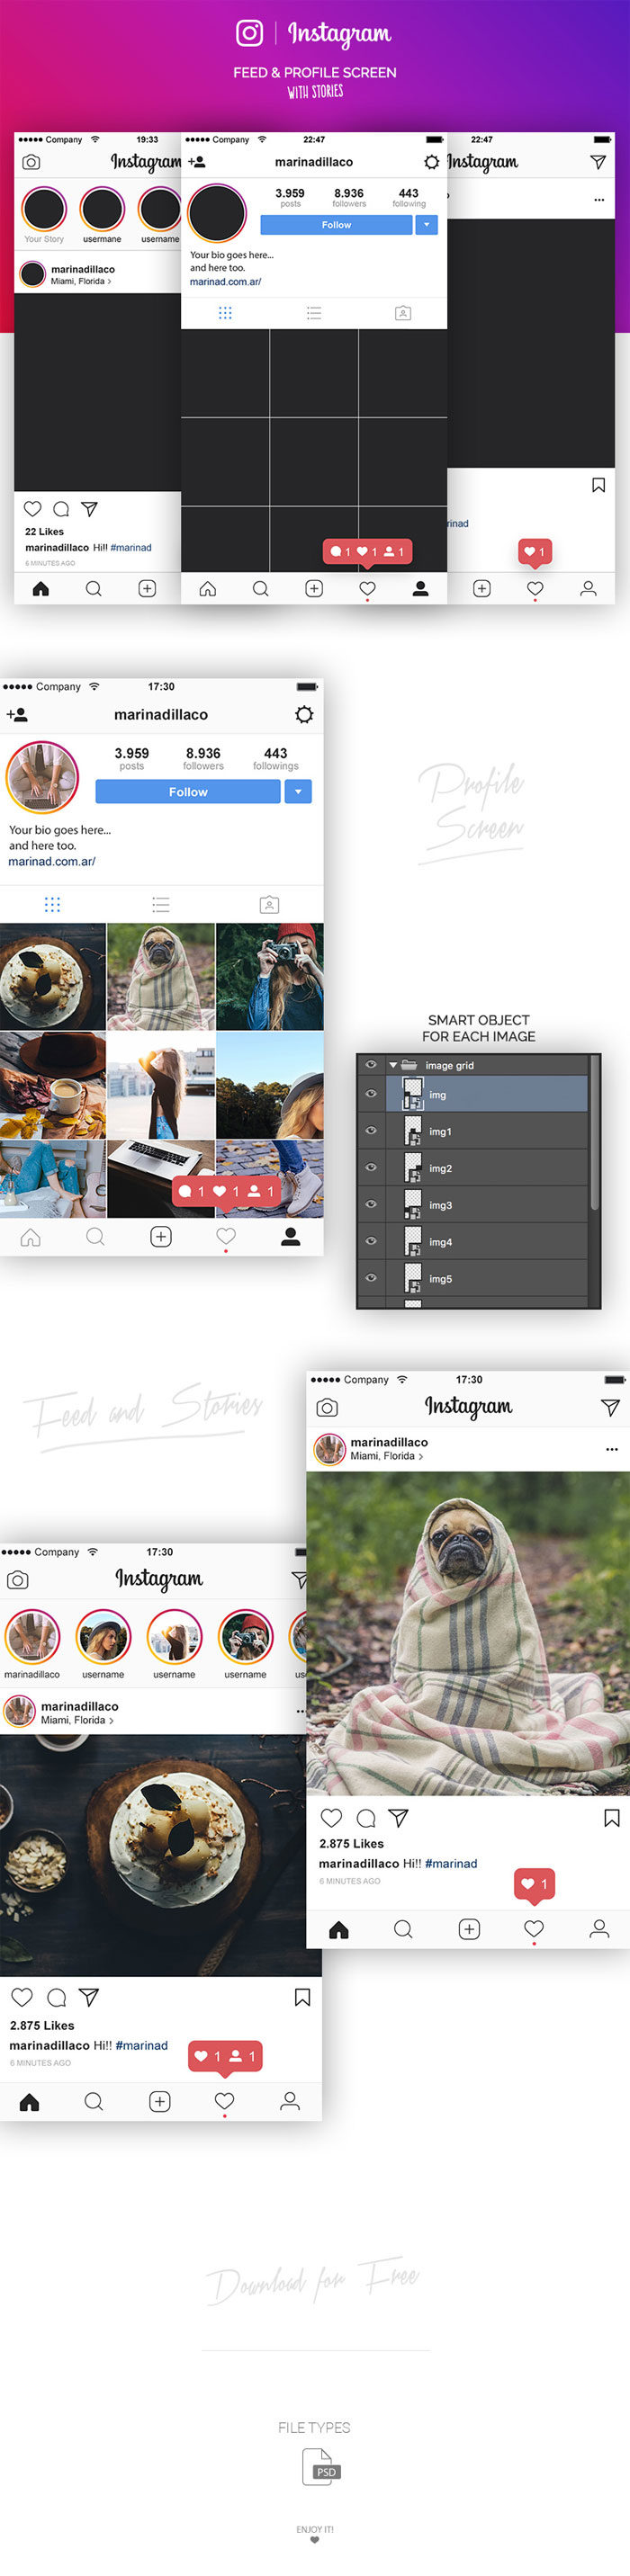 preview-instagram-2017-psd-700x2864 Instagram Mockup Templates to download for your presentations